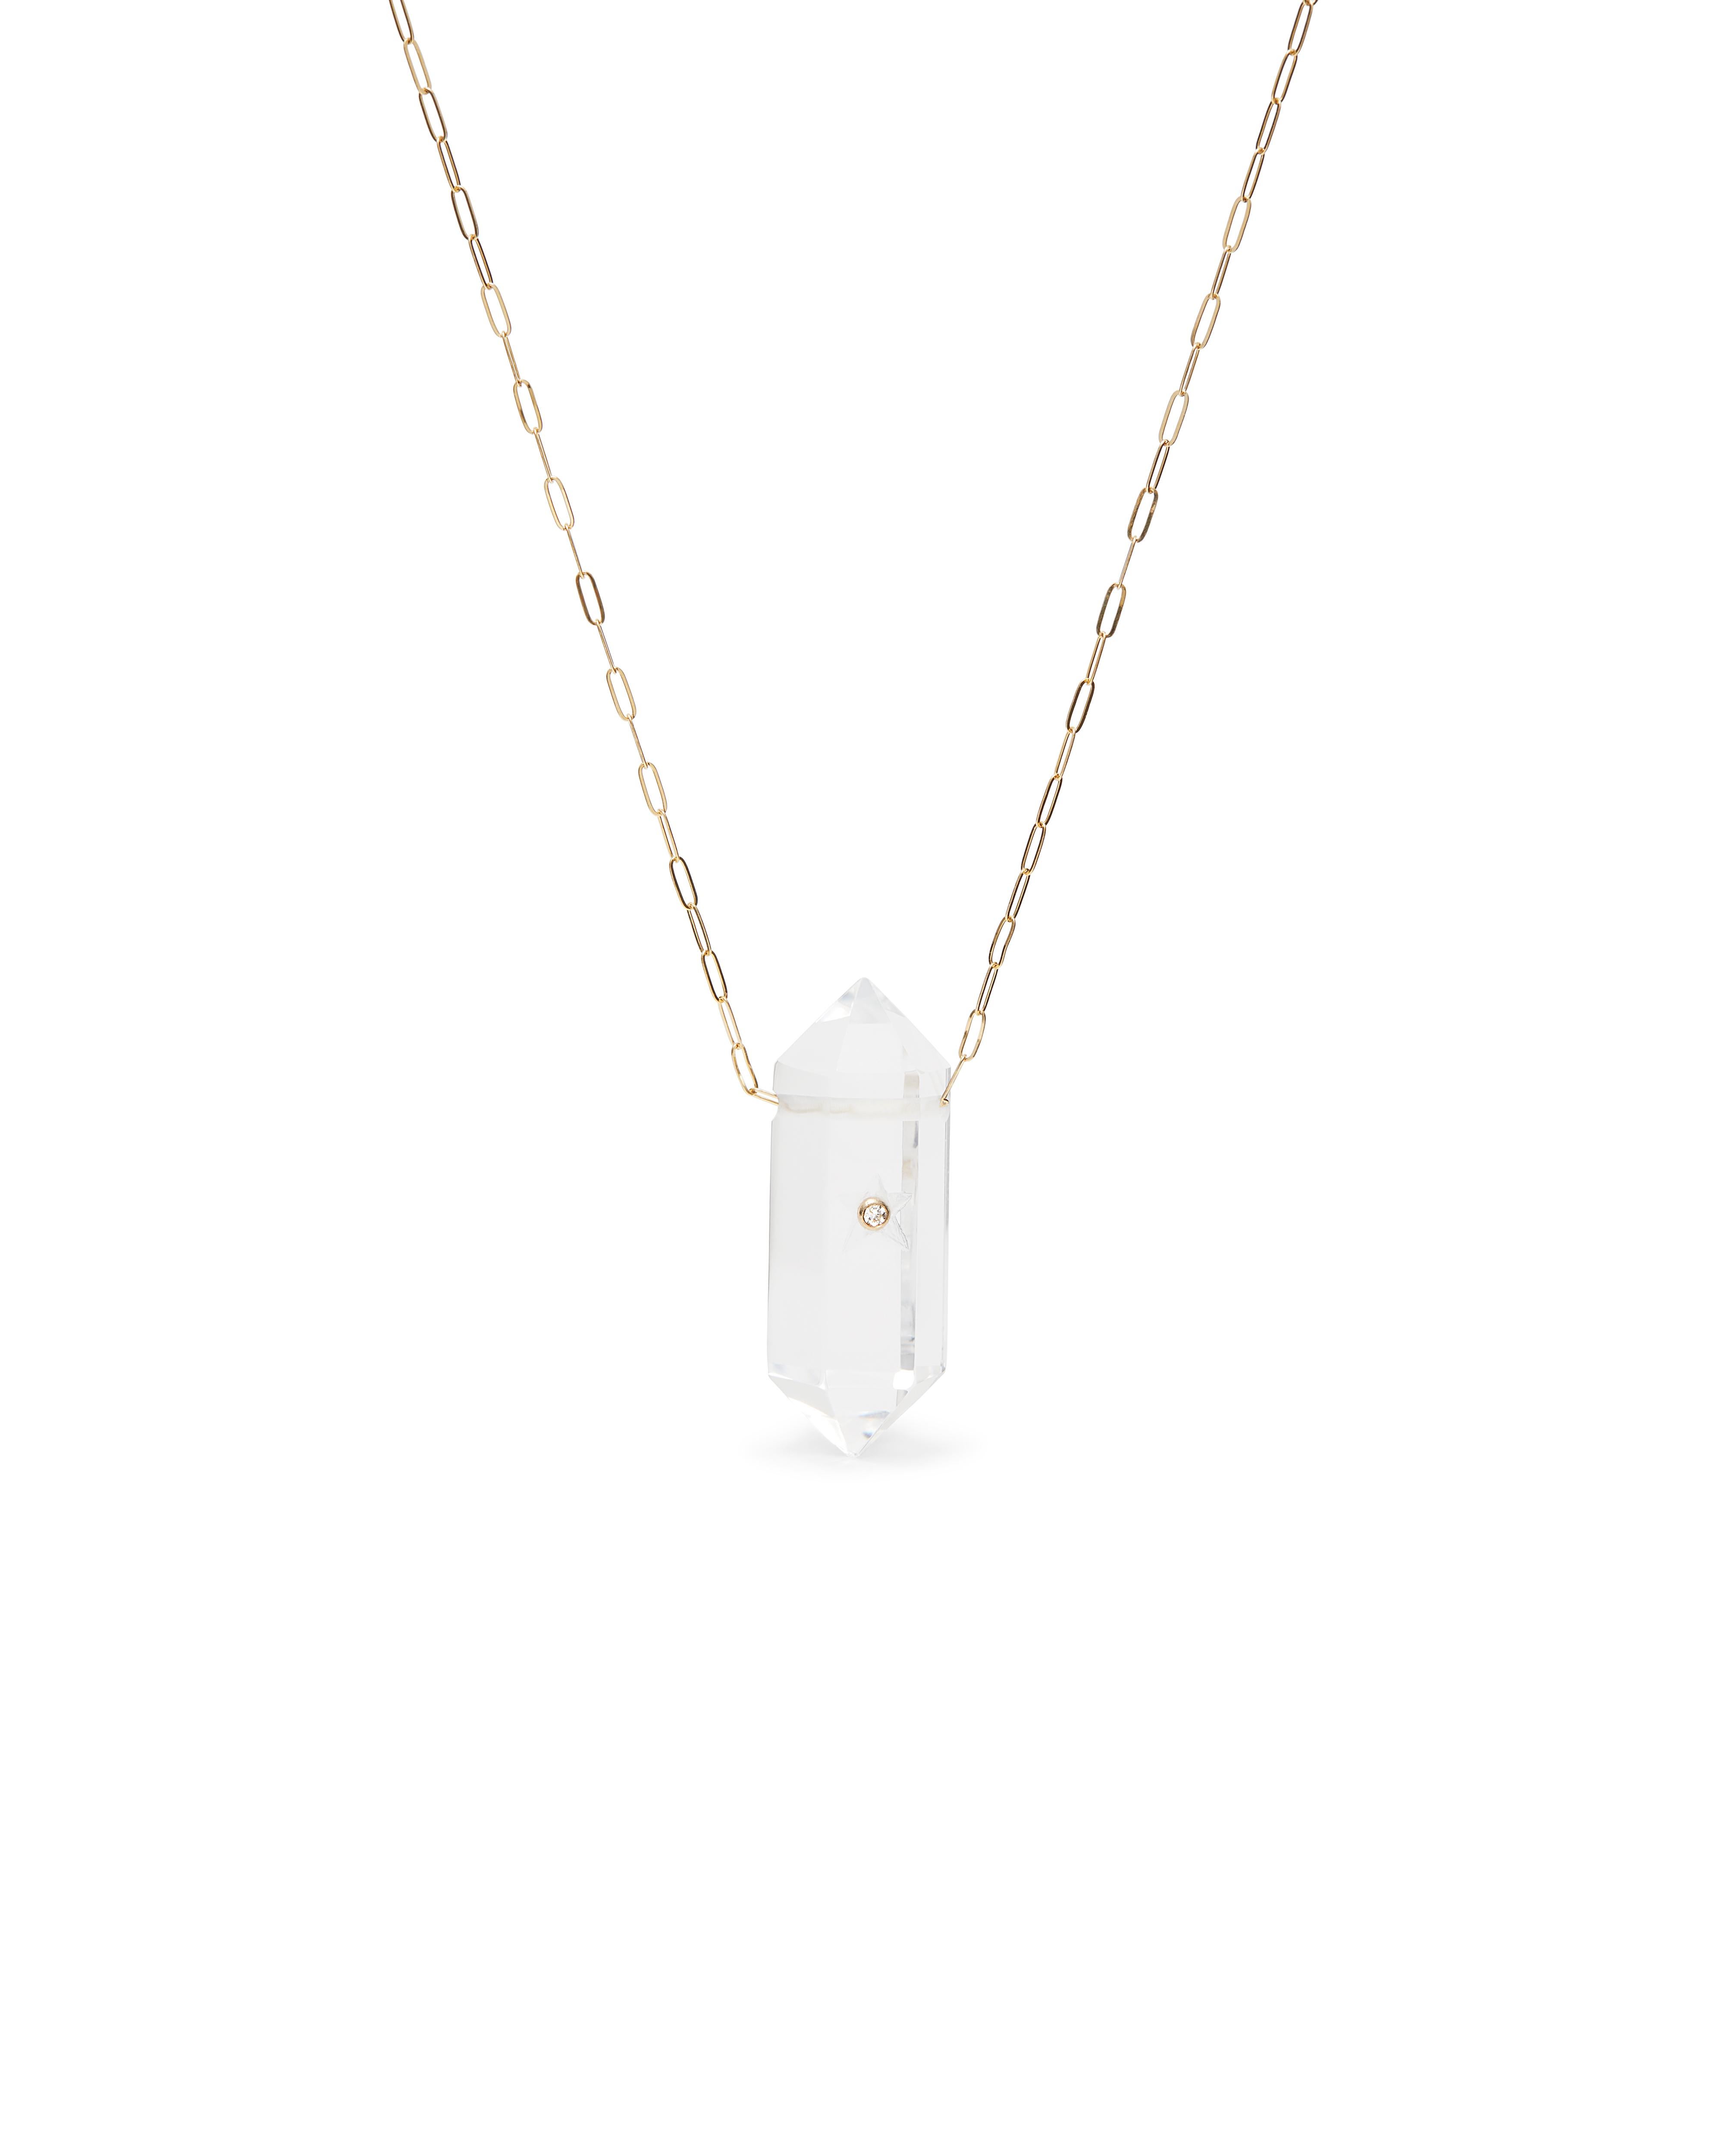 Mckenzie Liautaud 14 Kt Gold Rock Star Necklace 
14 kt Yellow Gold Paperclip necklace featuring a polished rock crystal pendant accented with a 2.3 mm white diamond set in a 14 kt yellow gold bezel and hand carved star.
Necklace measures 24